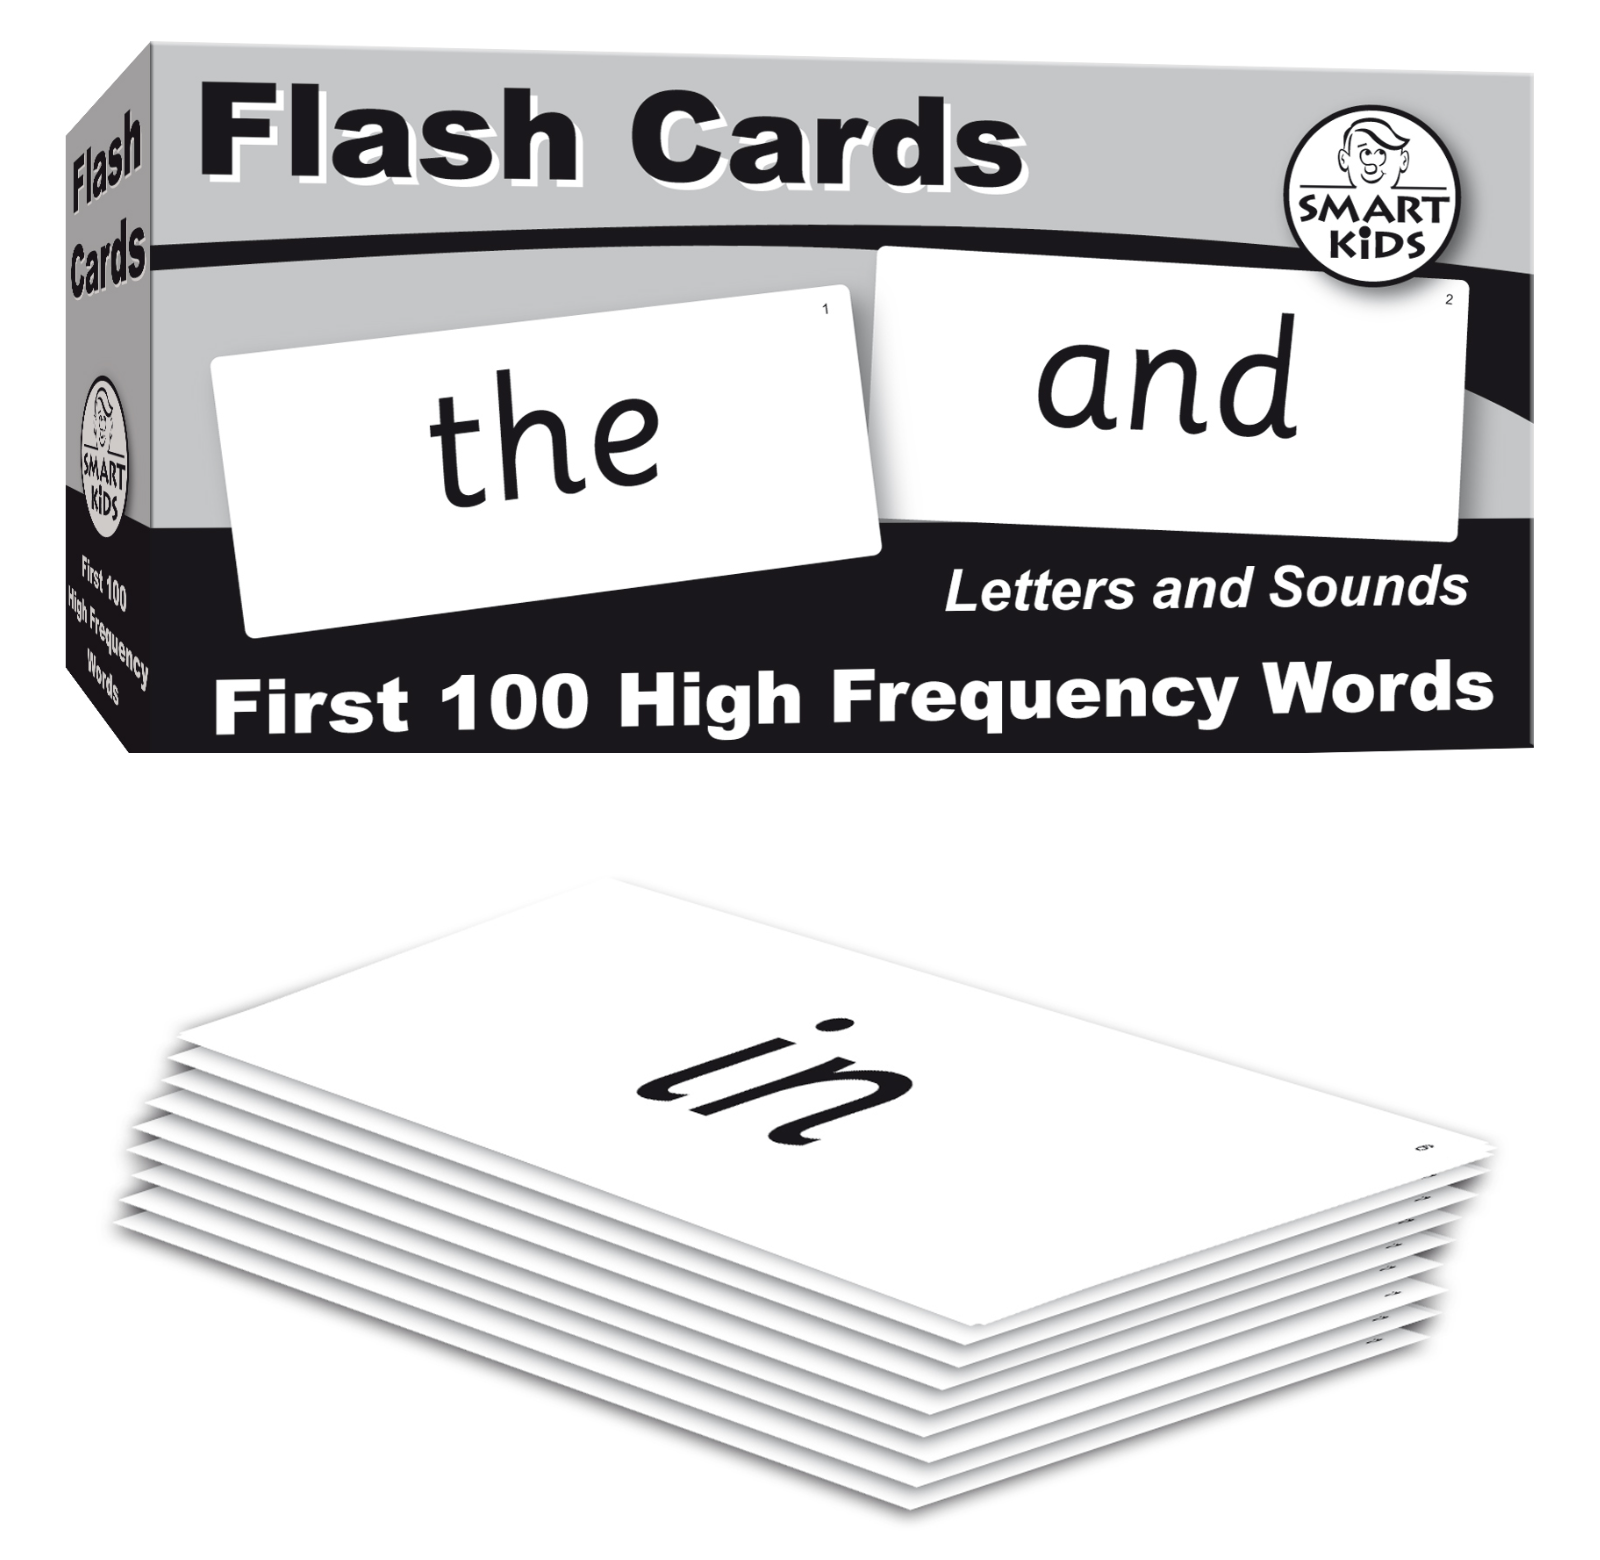 Oxford 100 High Frequency Words Flashcards in South Australian